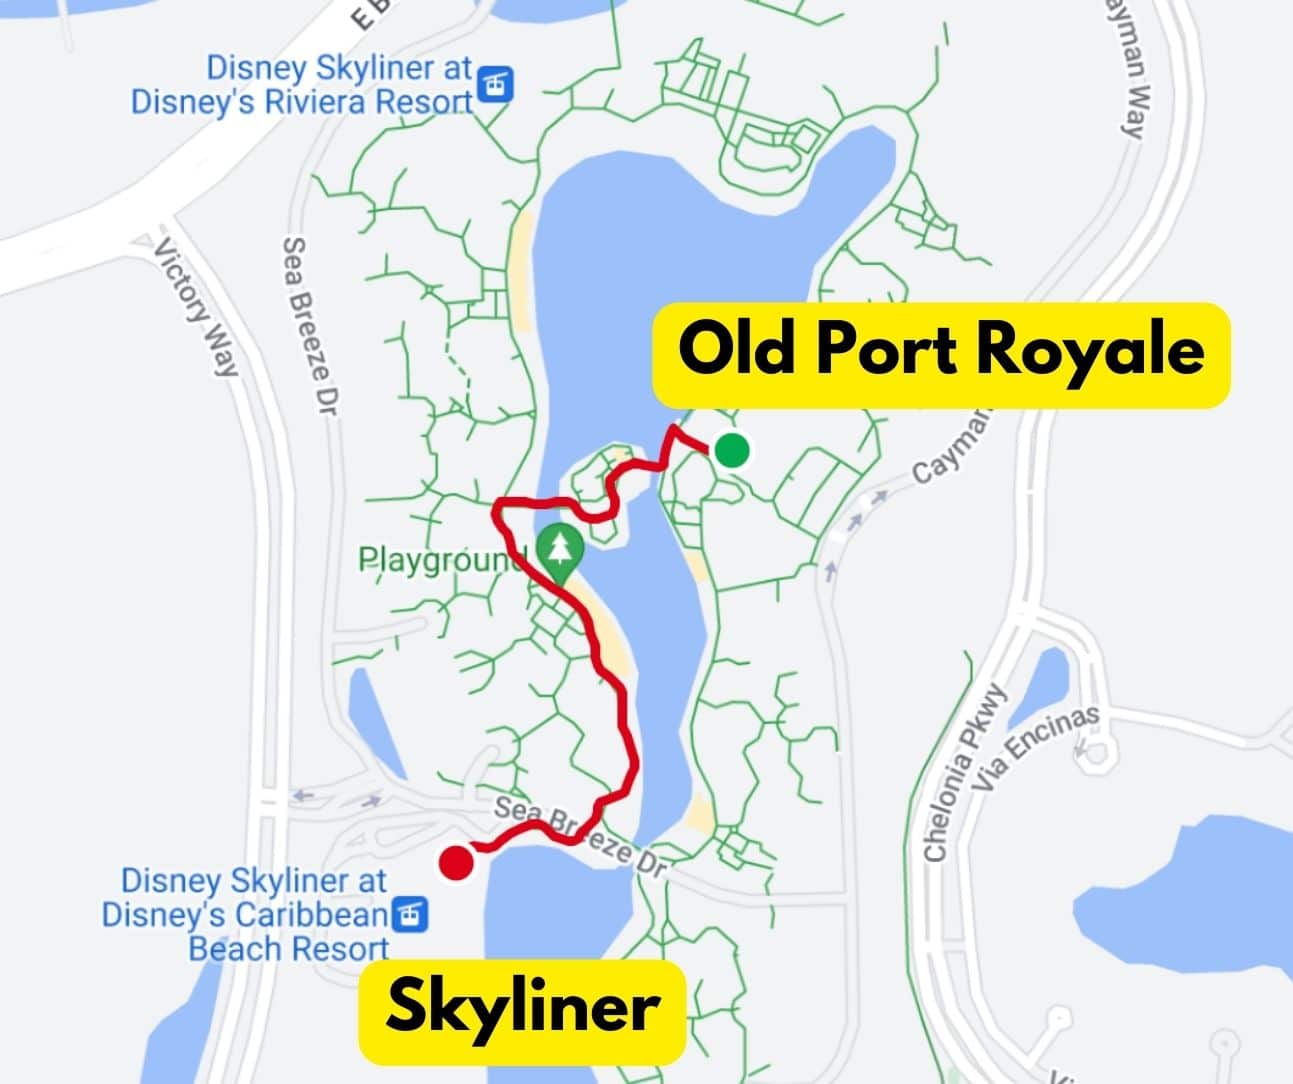 walking distance from Old Port Royale to the Skyliner 